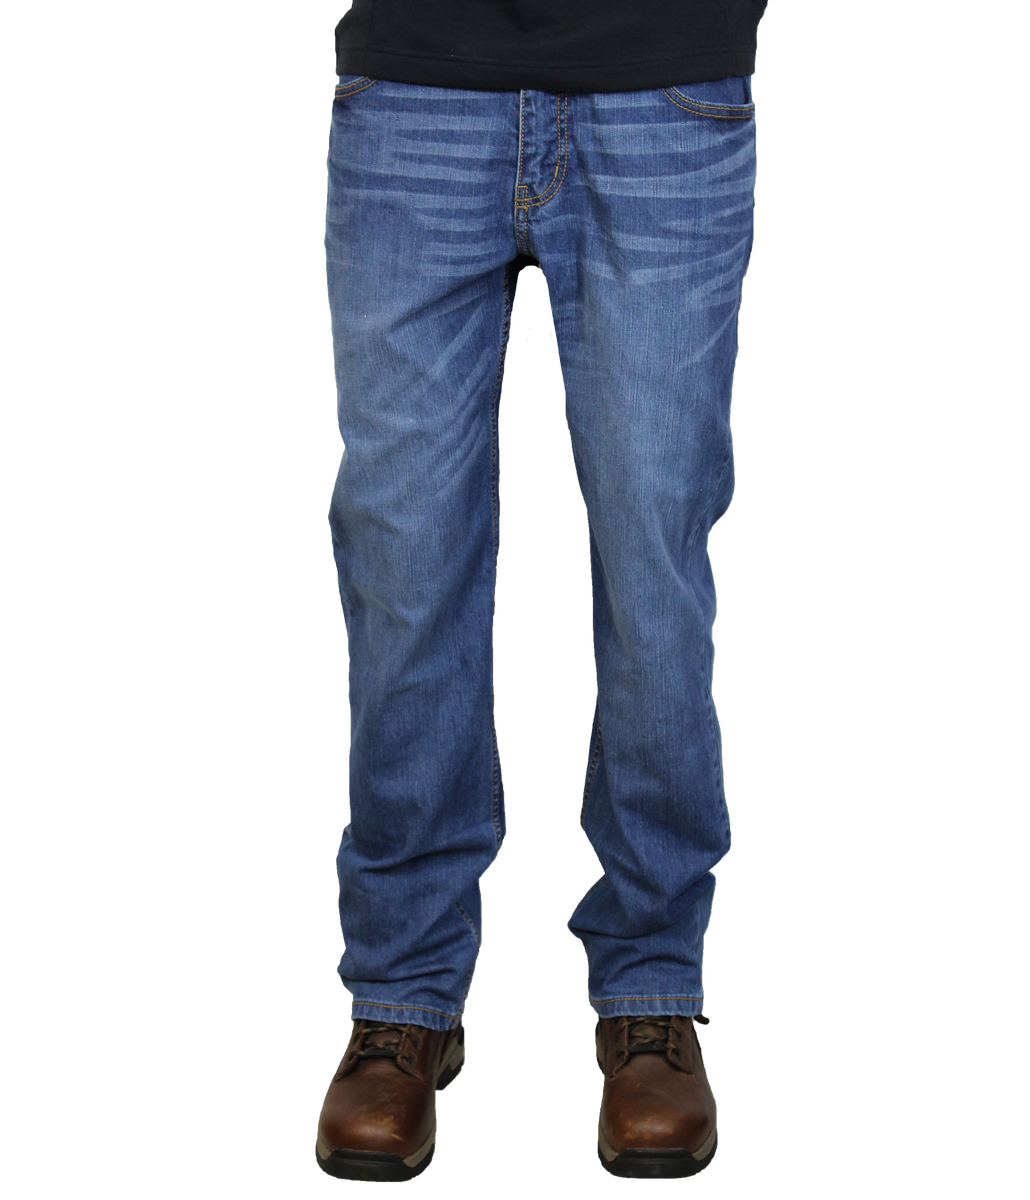 Marcellus & Utica Stretch Denim – Oil and Gas Safety Supply